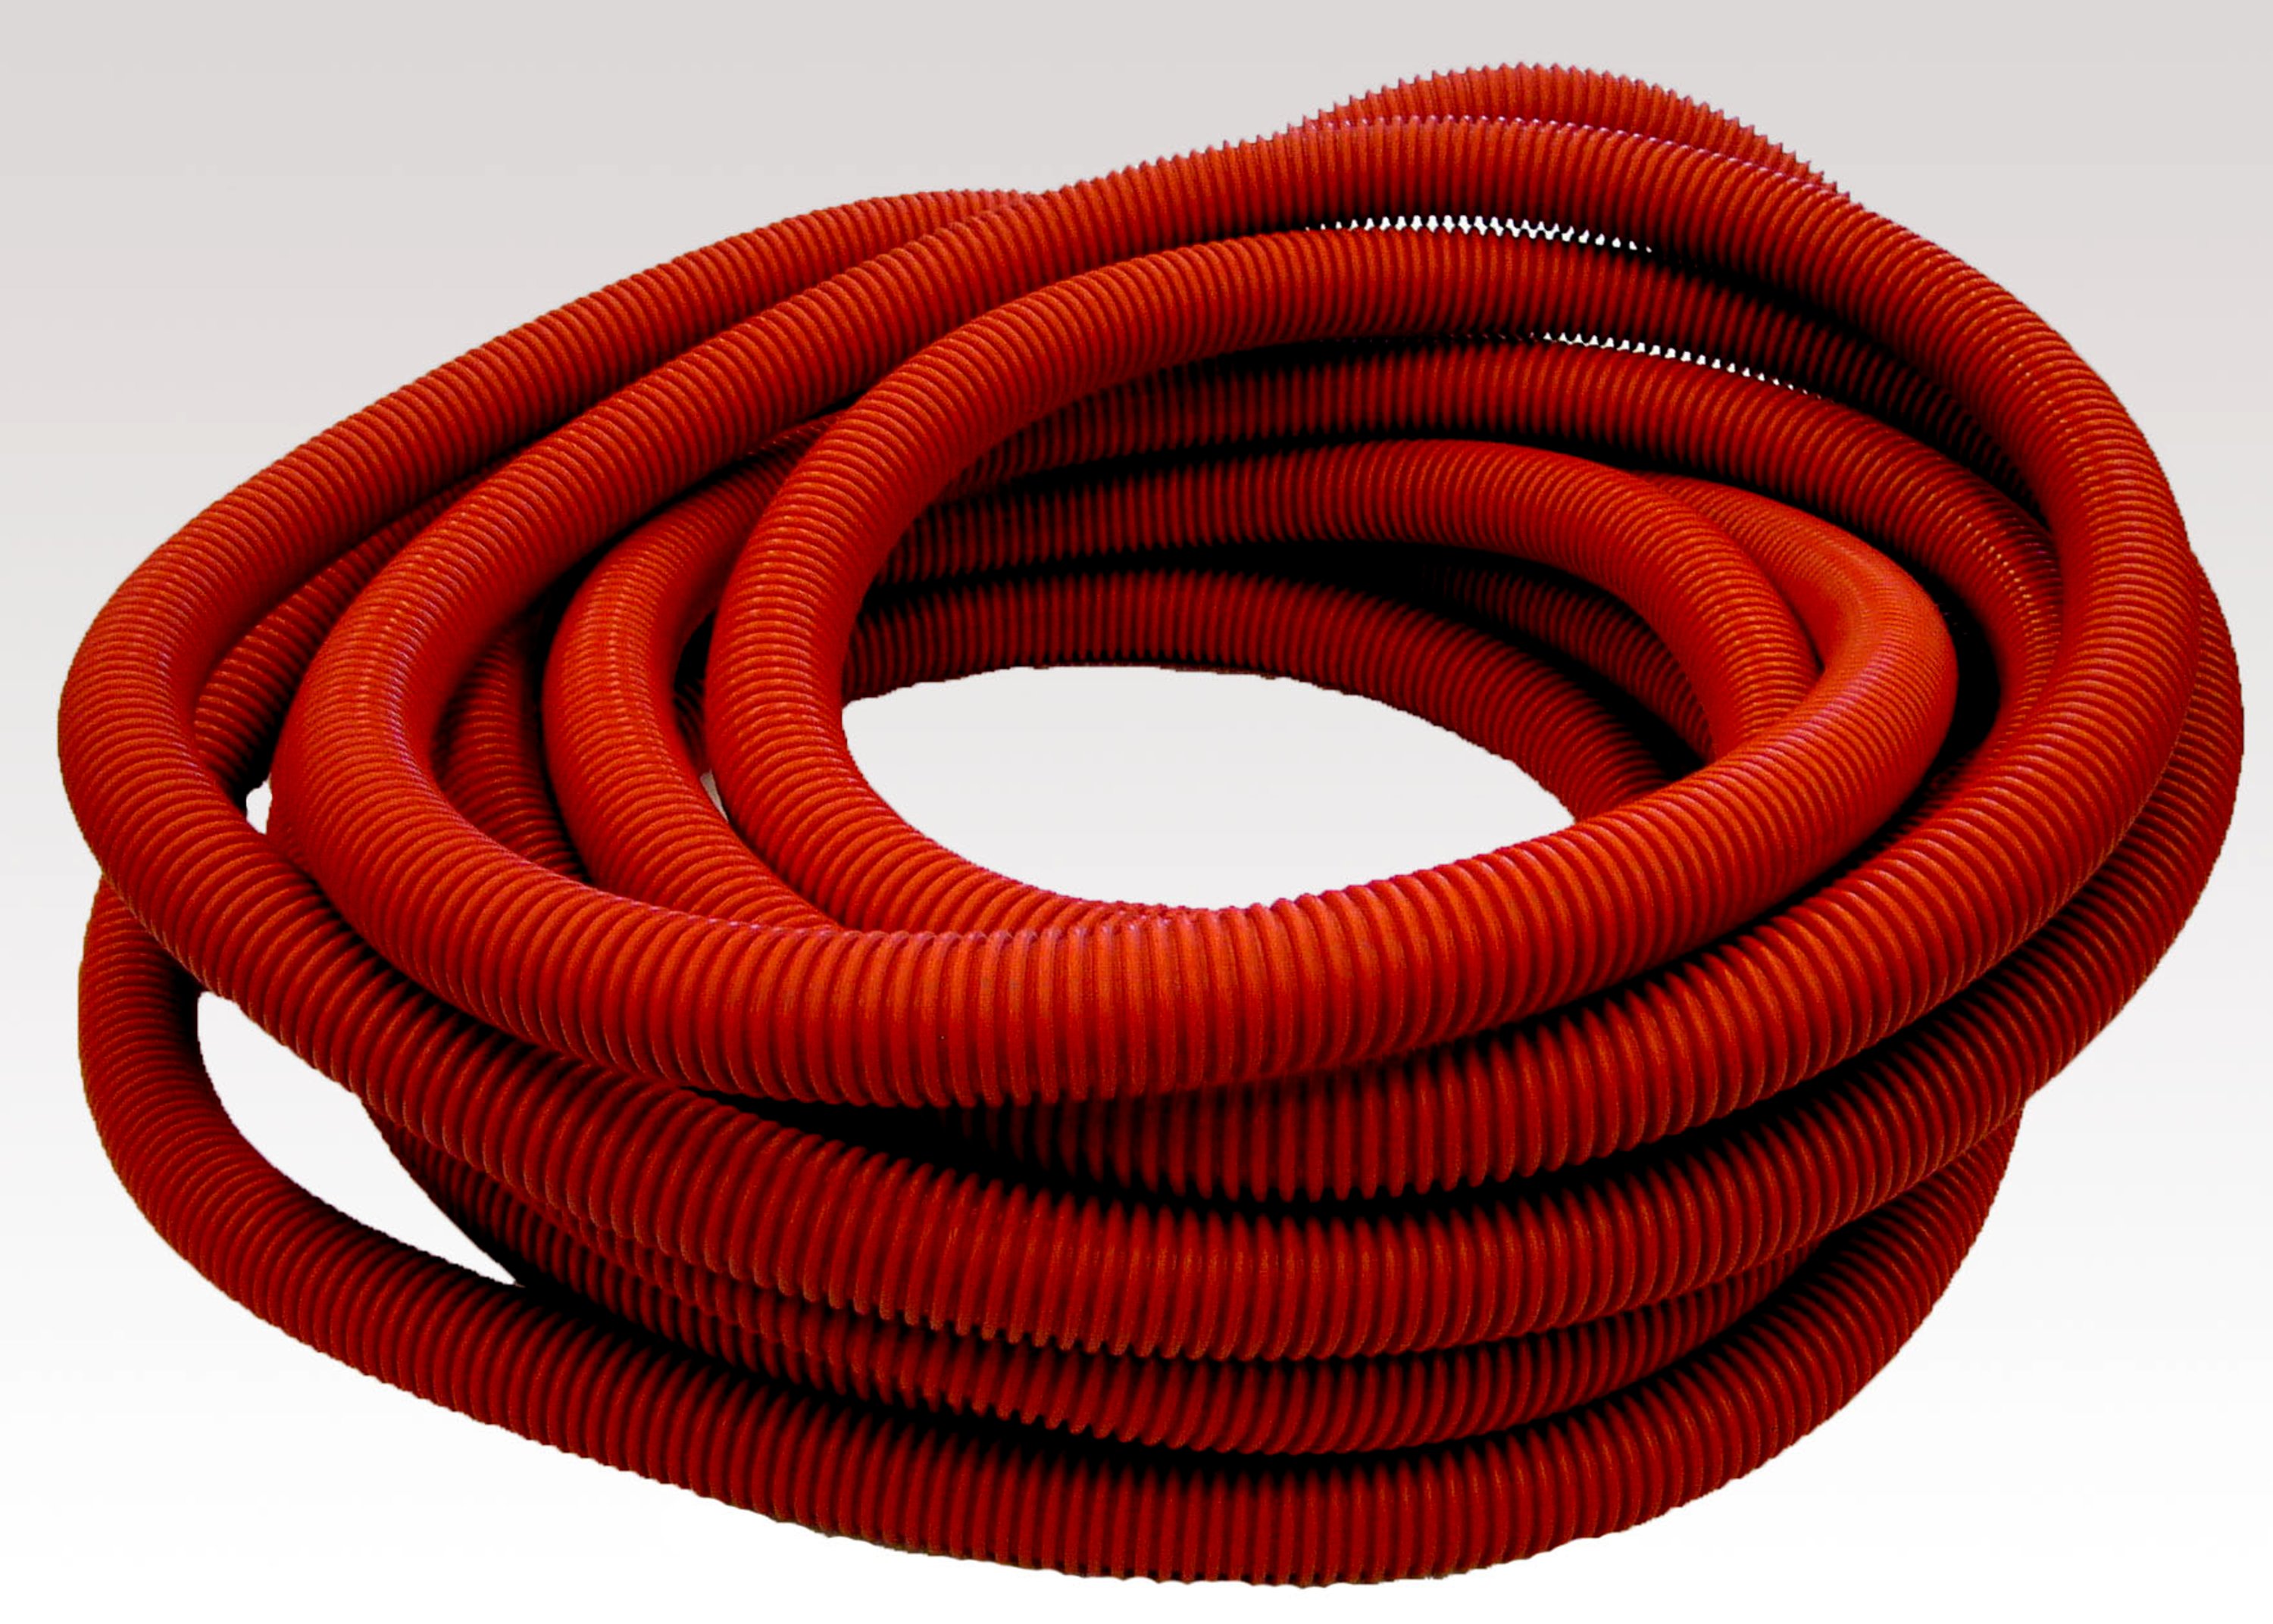 Whether operations require a standard or anti-static hose for dust collection, the 3M™ Vacuum Hose provides the connection between 3M central vacuum tools and workplace equipped central vacuum systems